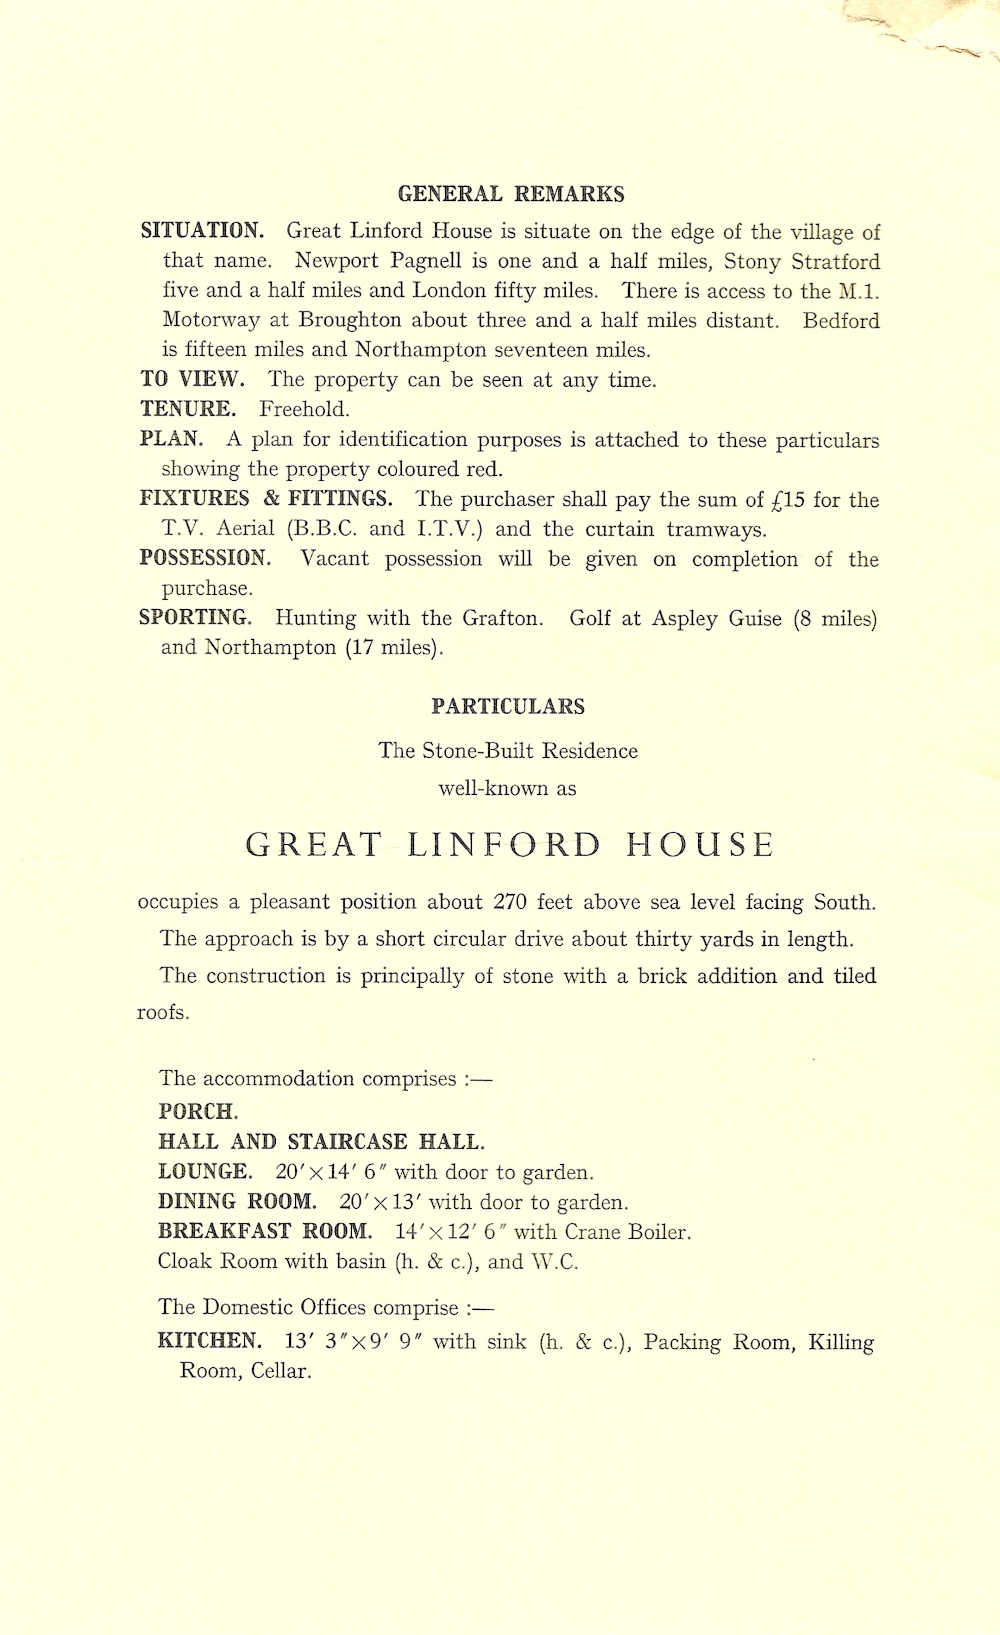 Great Linford House 1961 sales brochure page 1.